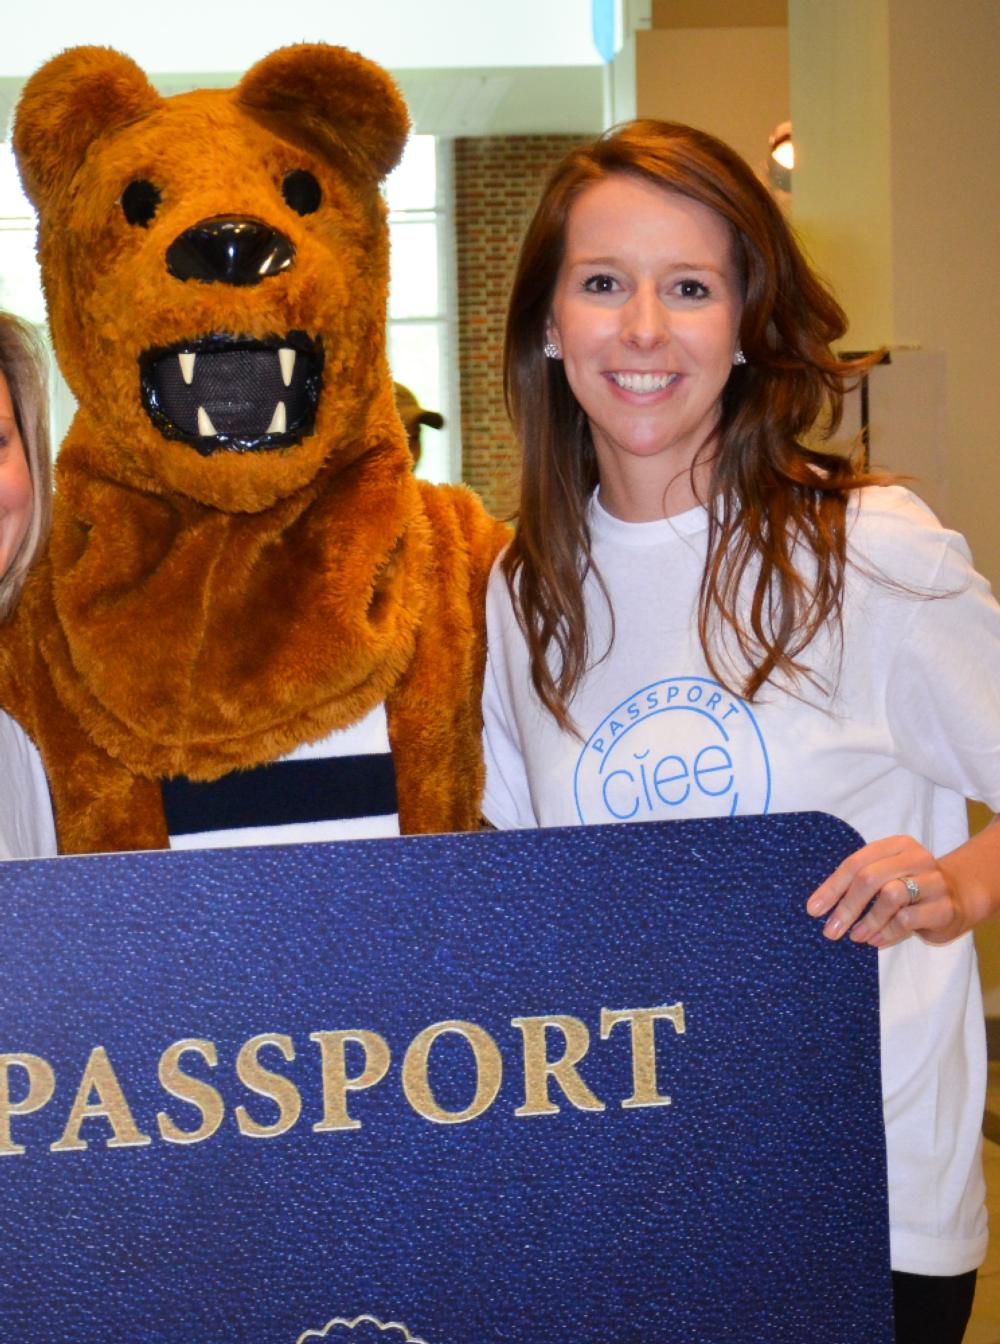 Kate and the Nittany Lion